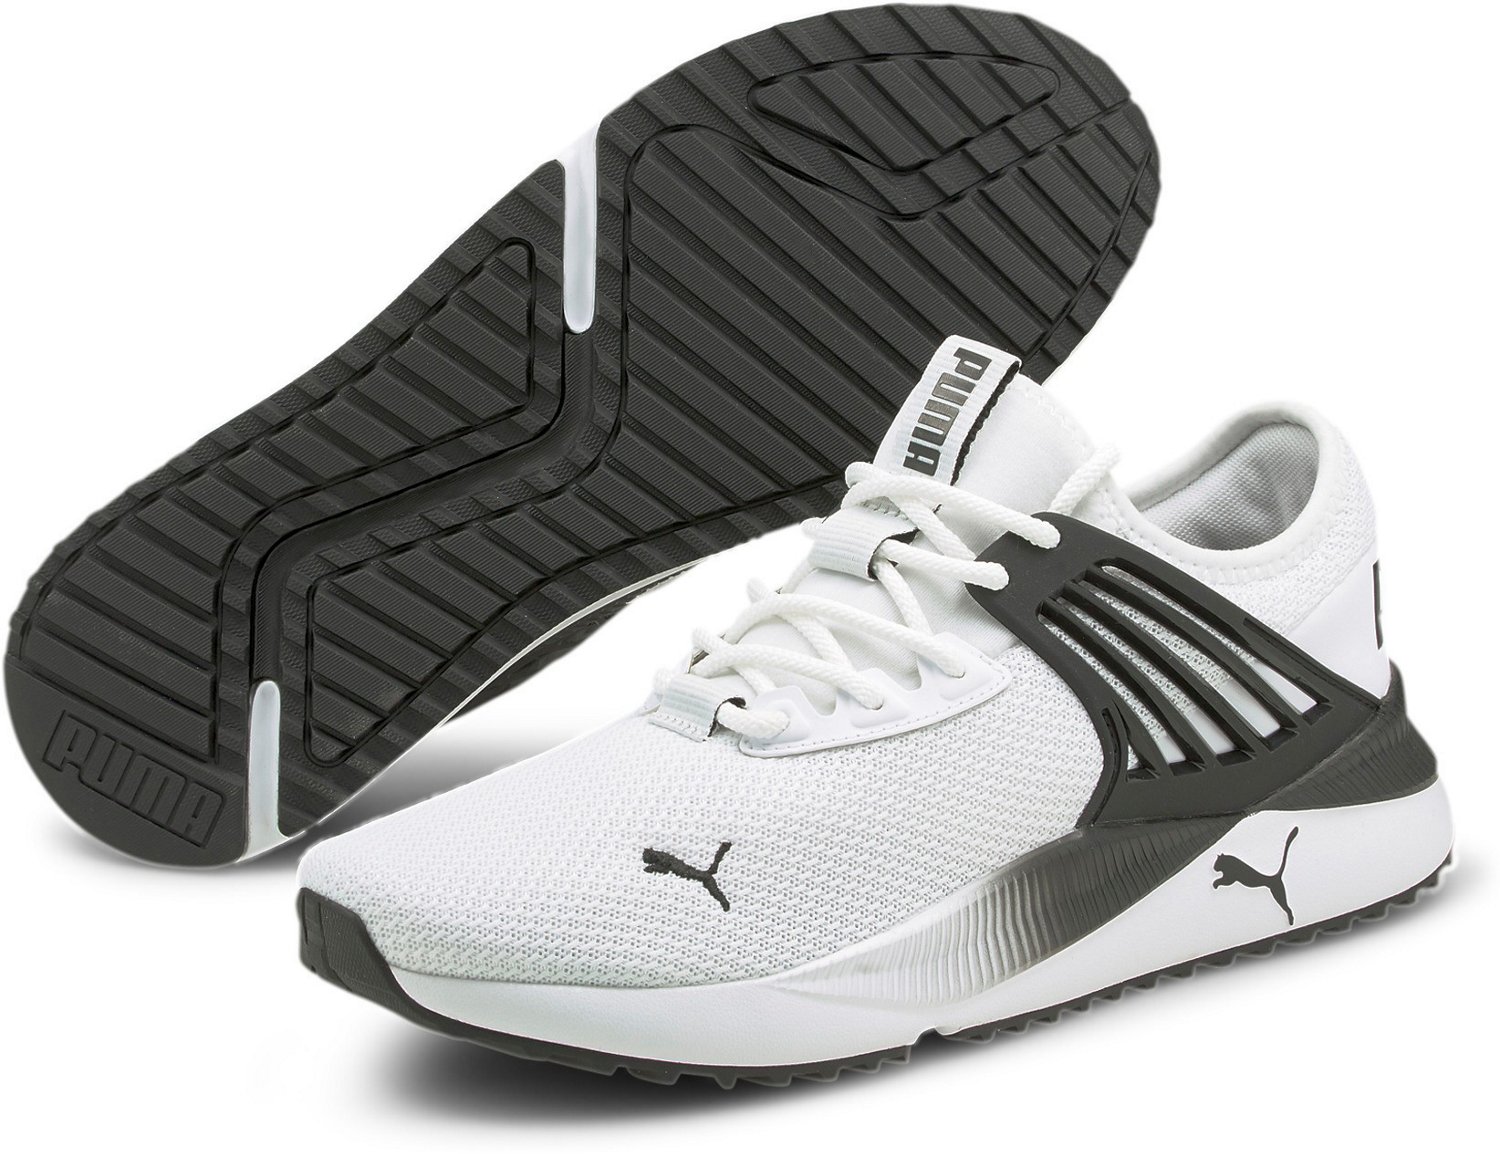 Search Results - Puma mens running shoes | Academy